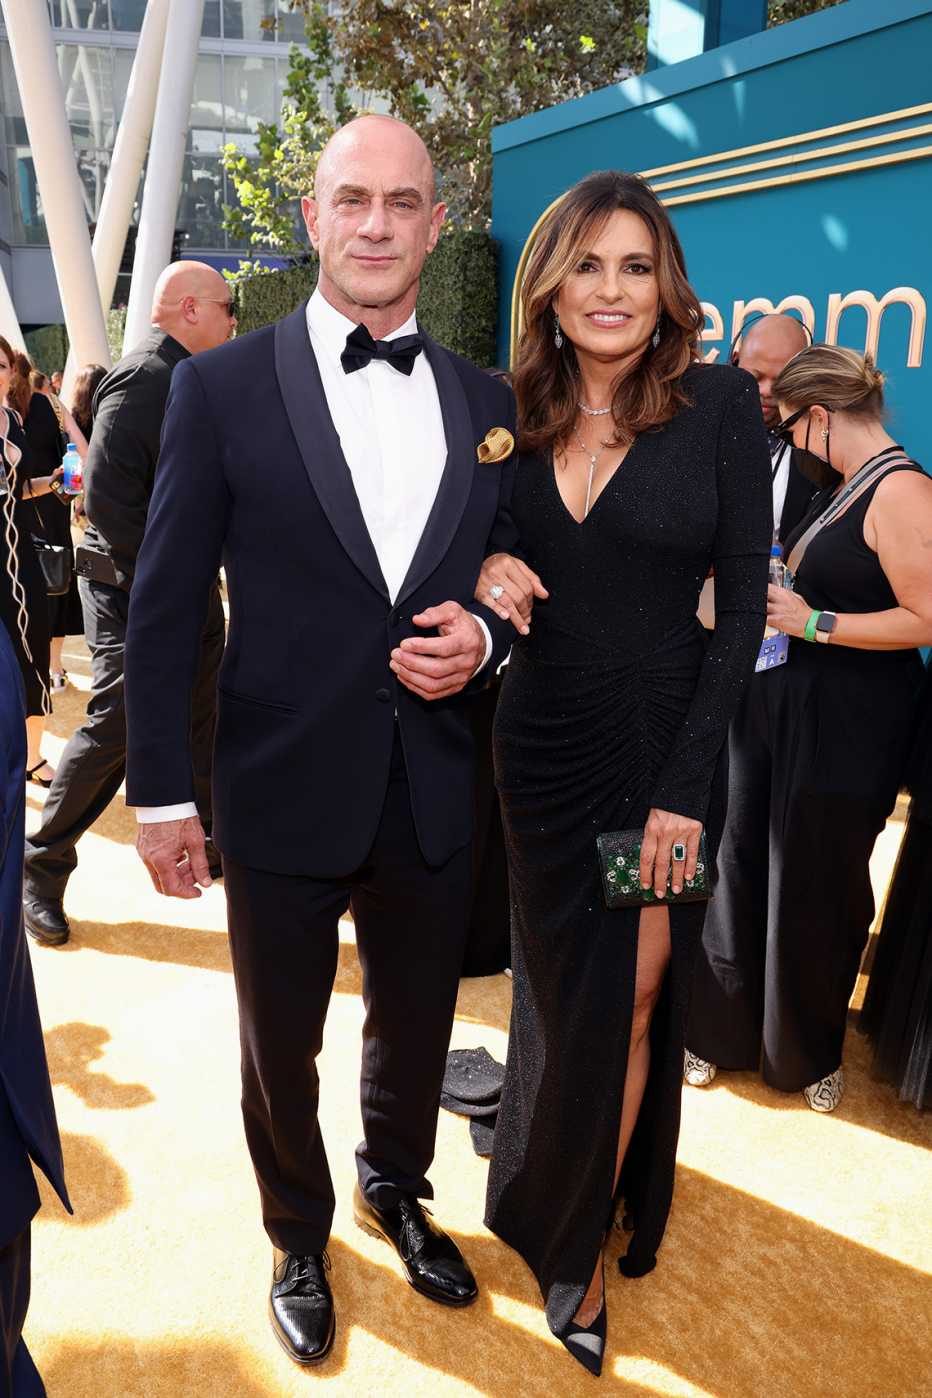 Christopher Meloni and Mariska Hargitay at the 74th Annual Primetime Emmy Awards